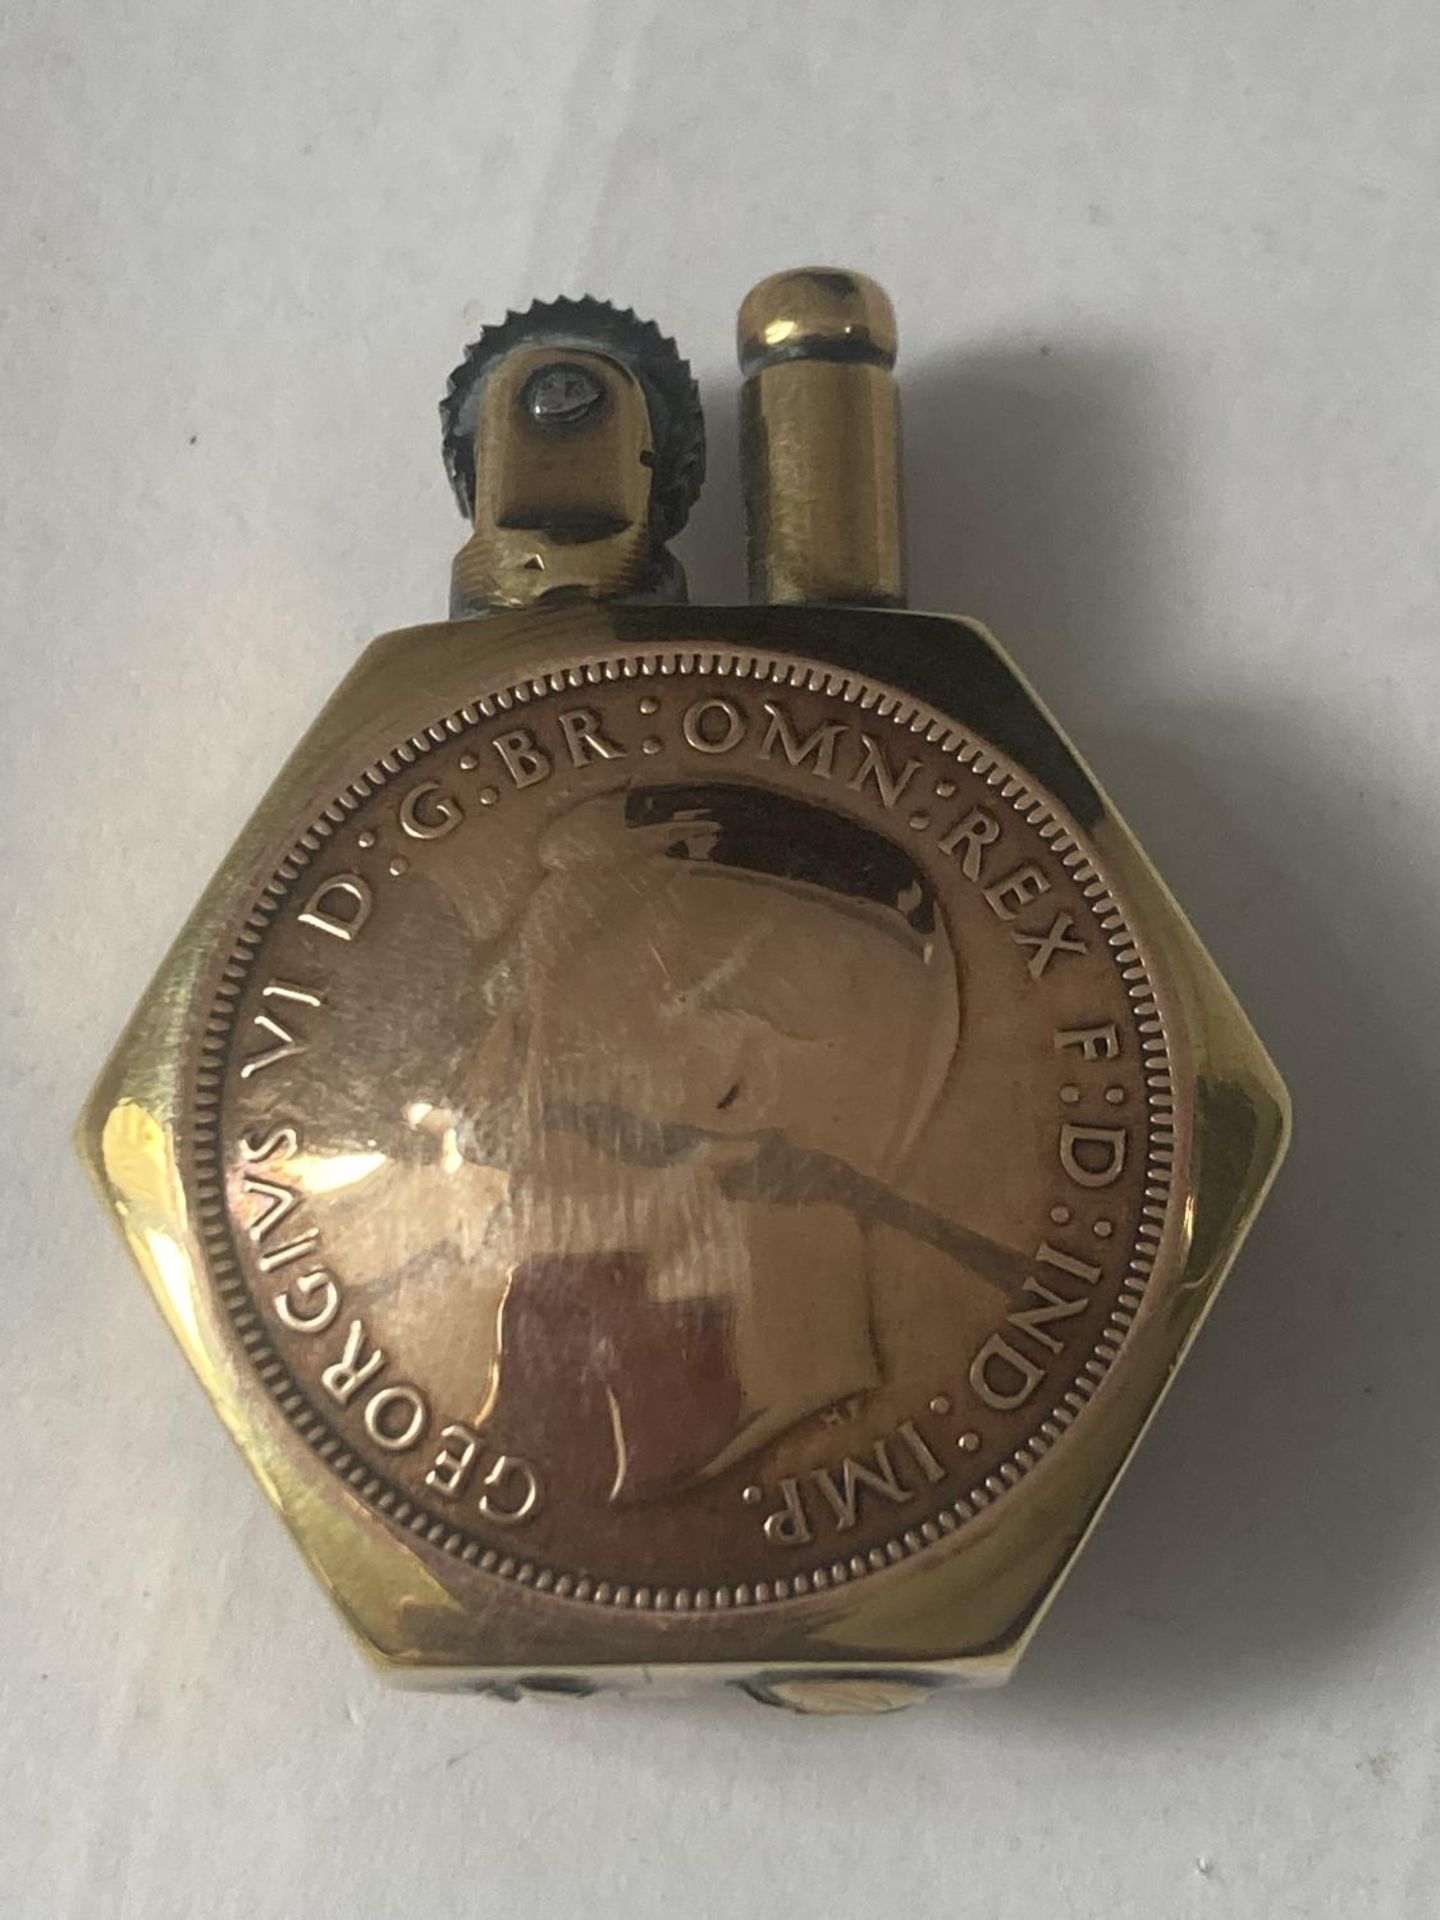 A 1937 ONE PENNY TRENCH ART LIGHTER - Image 2 of 4